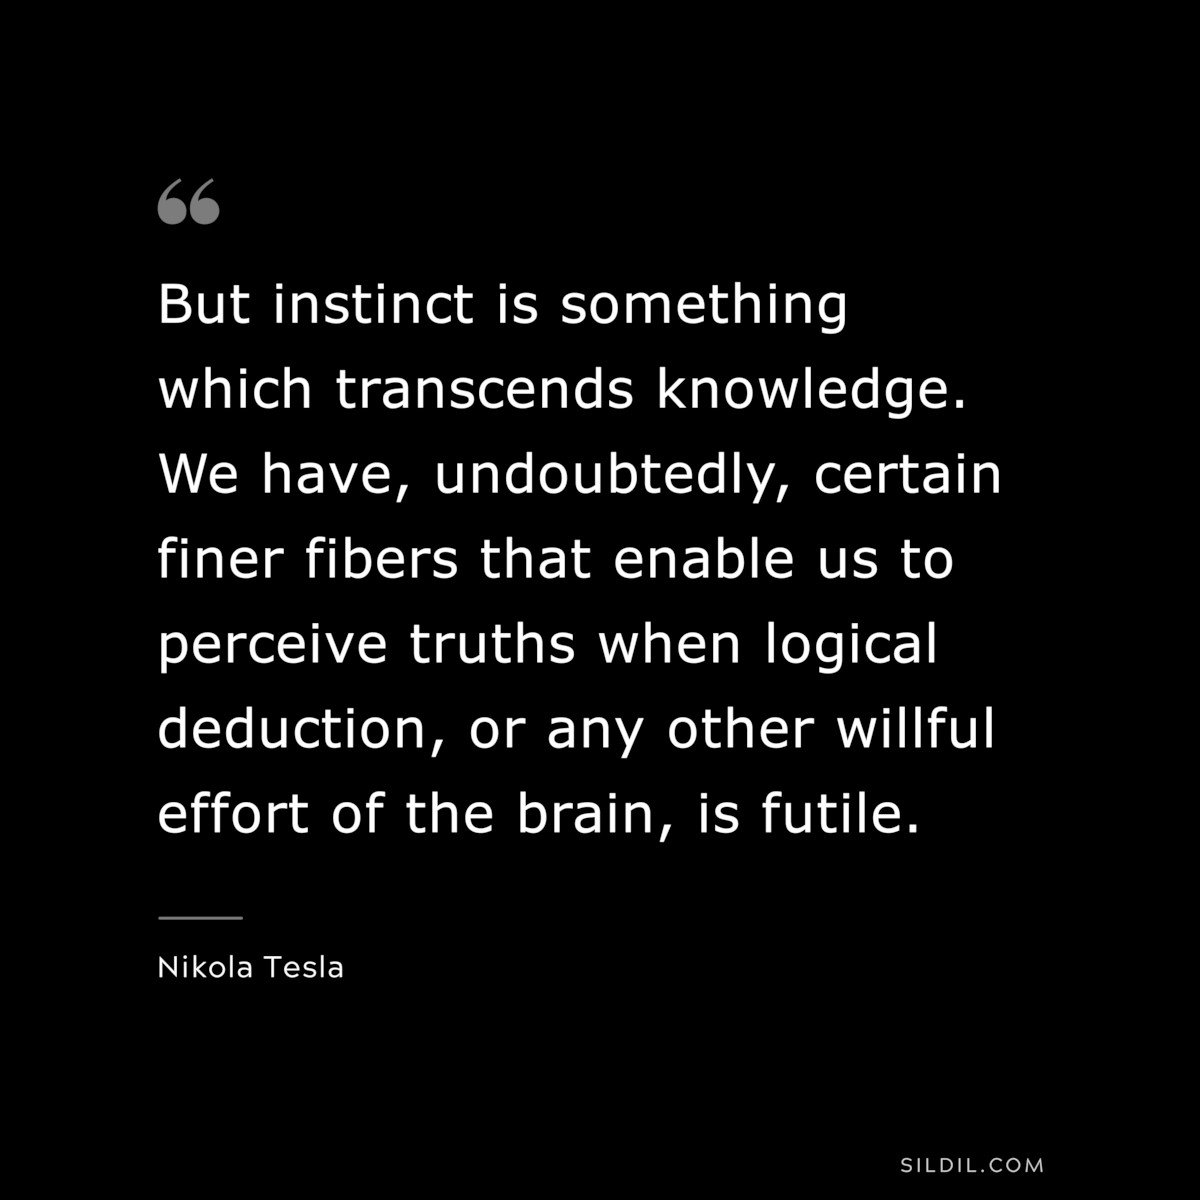 But instinct is something which transcends knowledge. We have, undoubtedly, certain finer fibers that enable us to perceive truths when logical deduction, or any other willful effort of the brain, is futile. ― Nikola Tesla